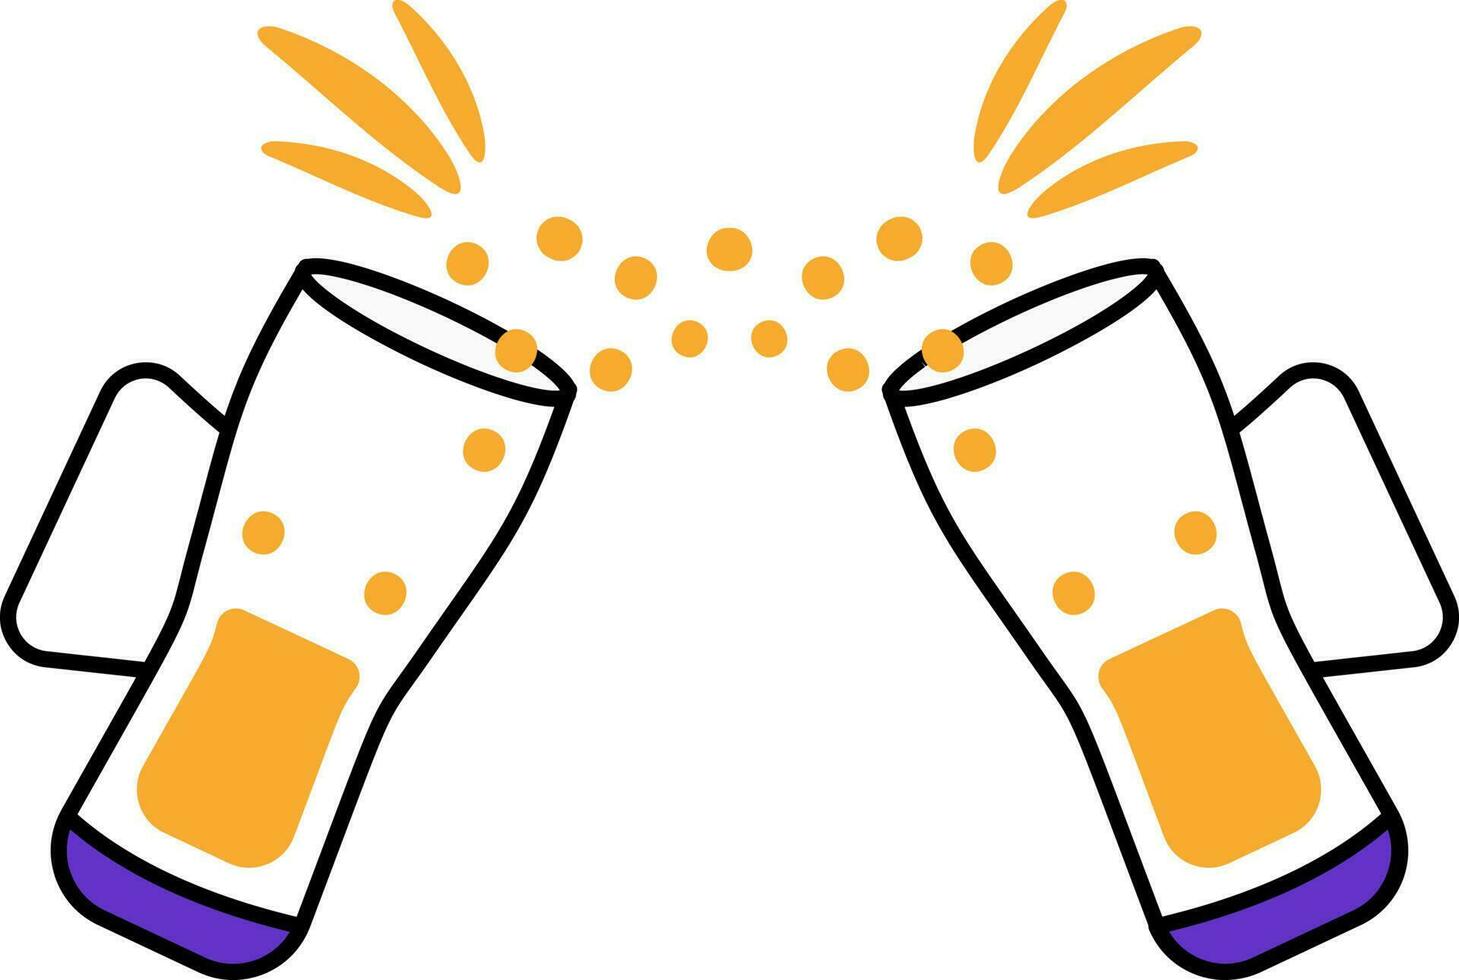 Flat Style Cheers Wine Glass Orange And Violet Icon. vector